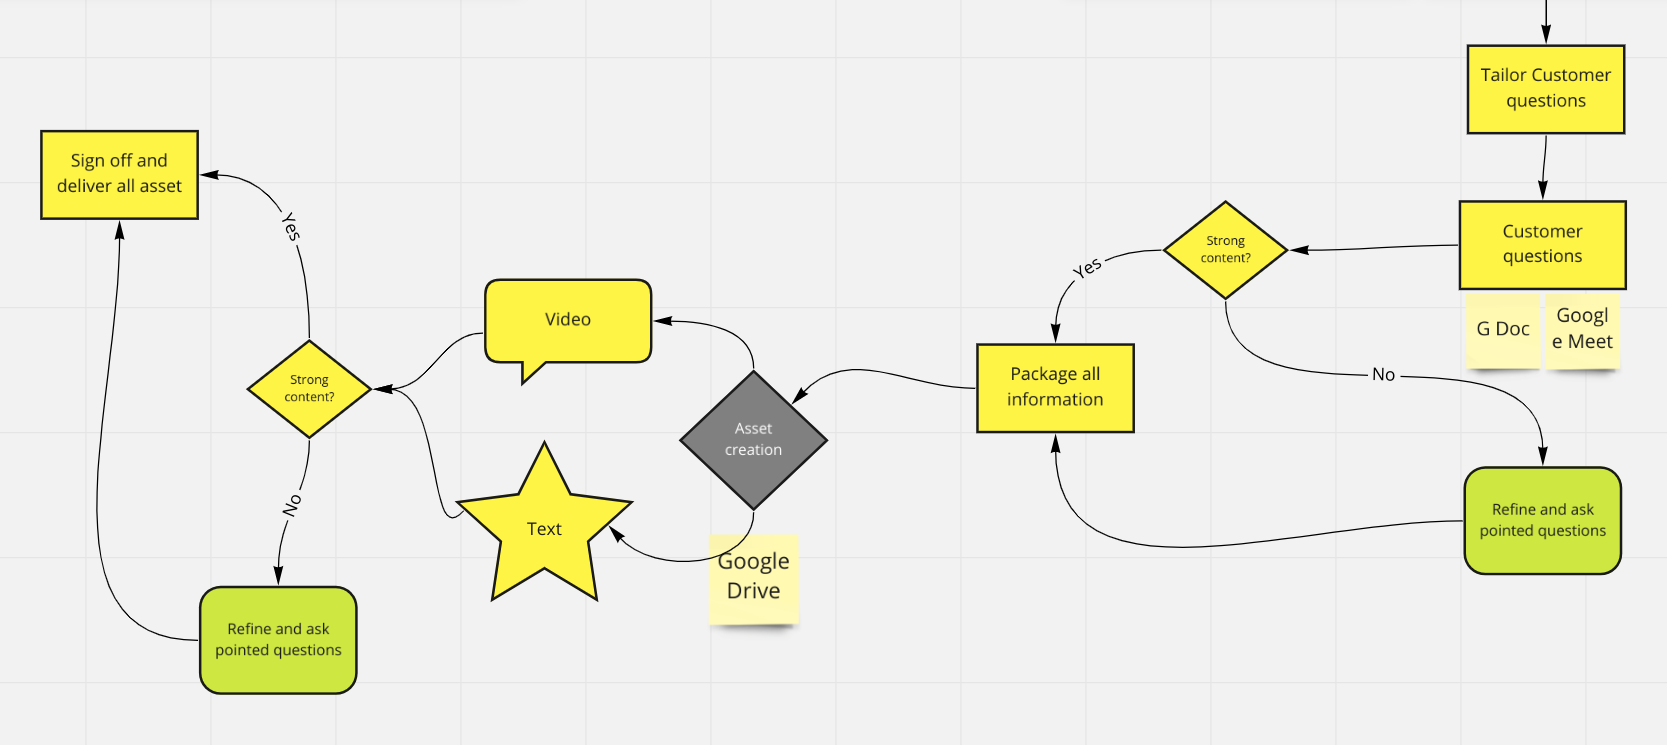 Step by step guide for how to map out true user journeys